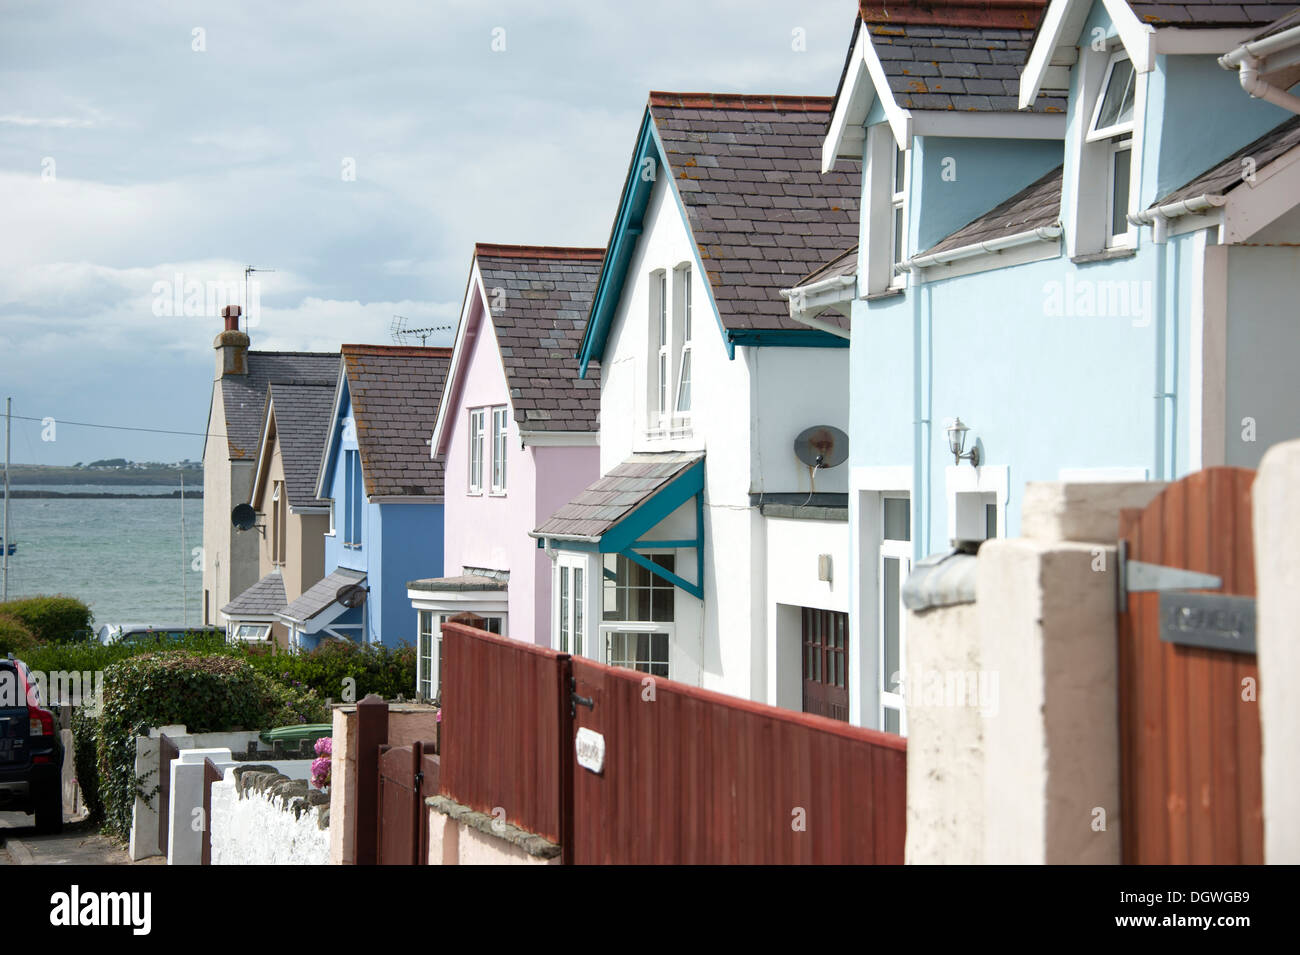 Seaside Cottages Colourful North Wales Uk Stock Photo 62027261